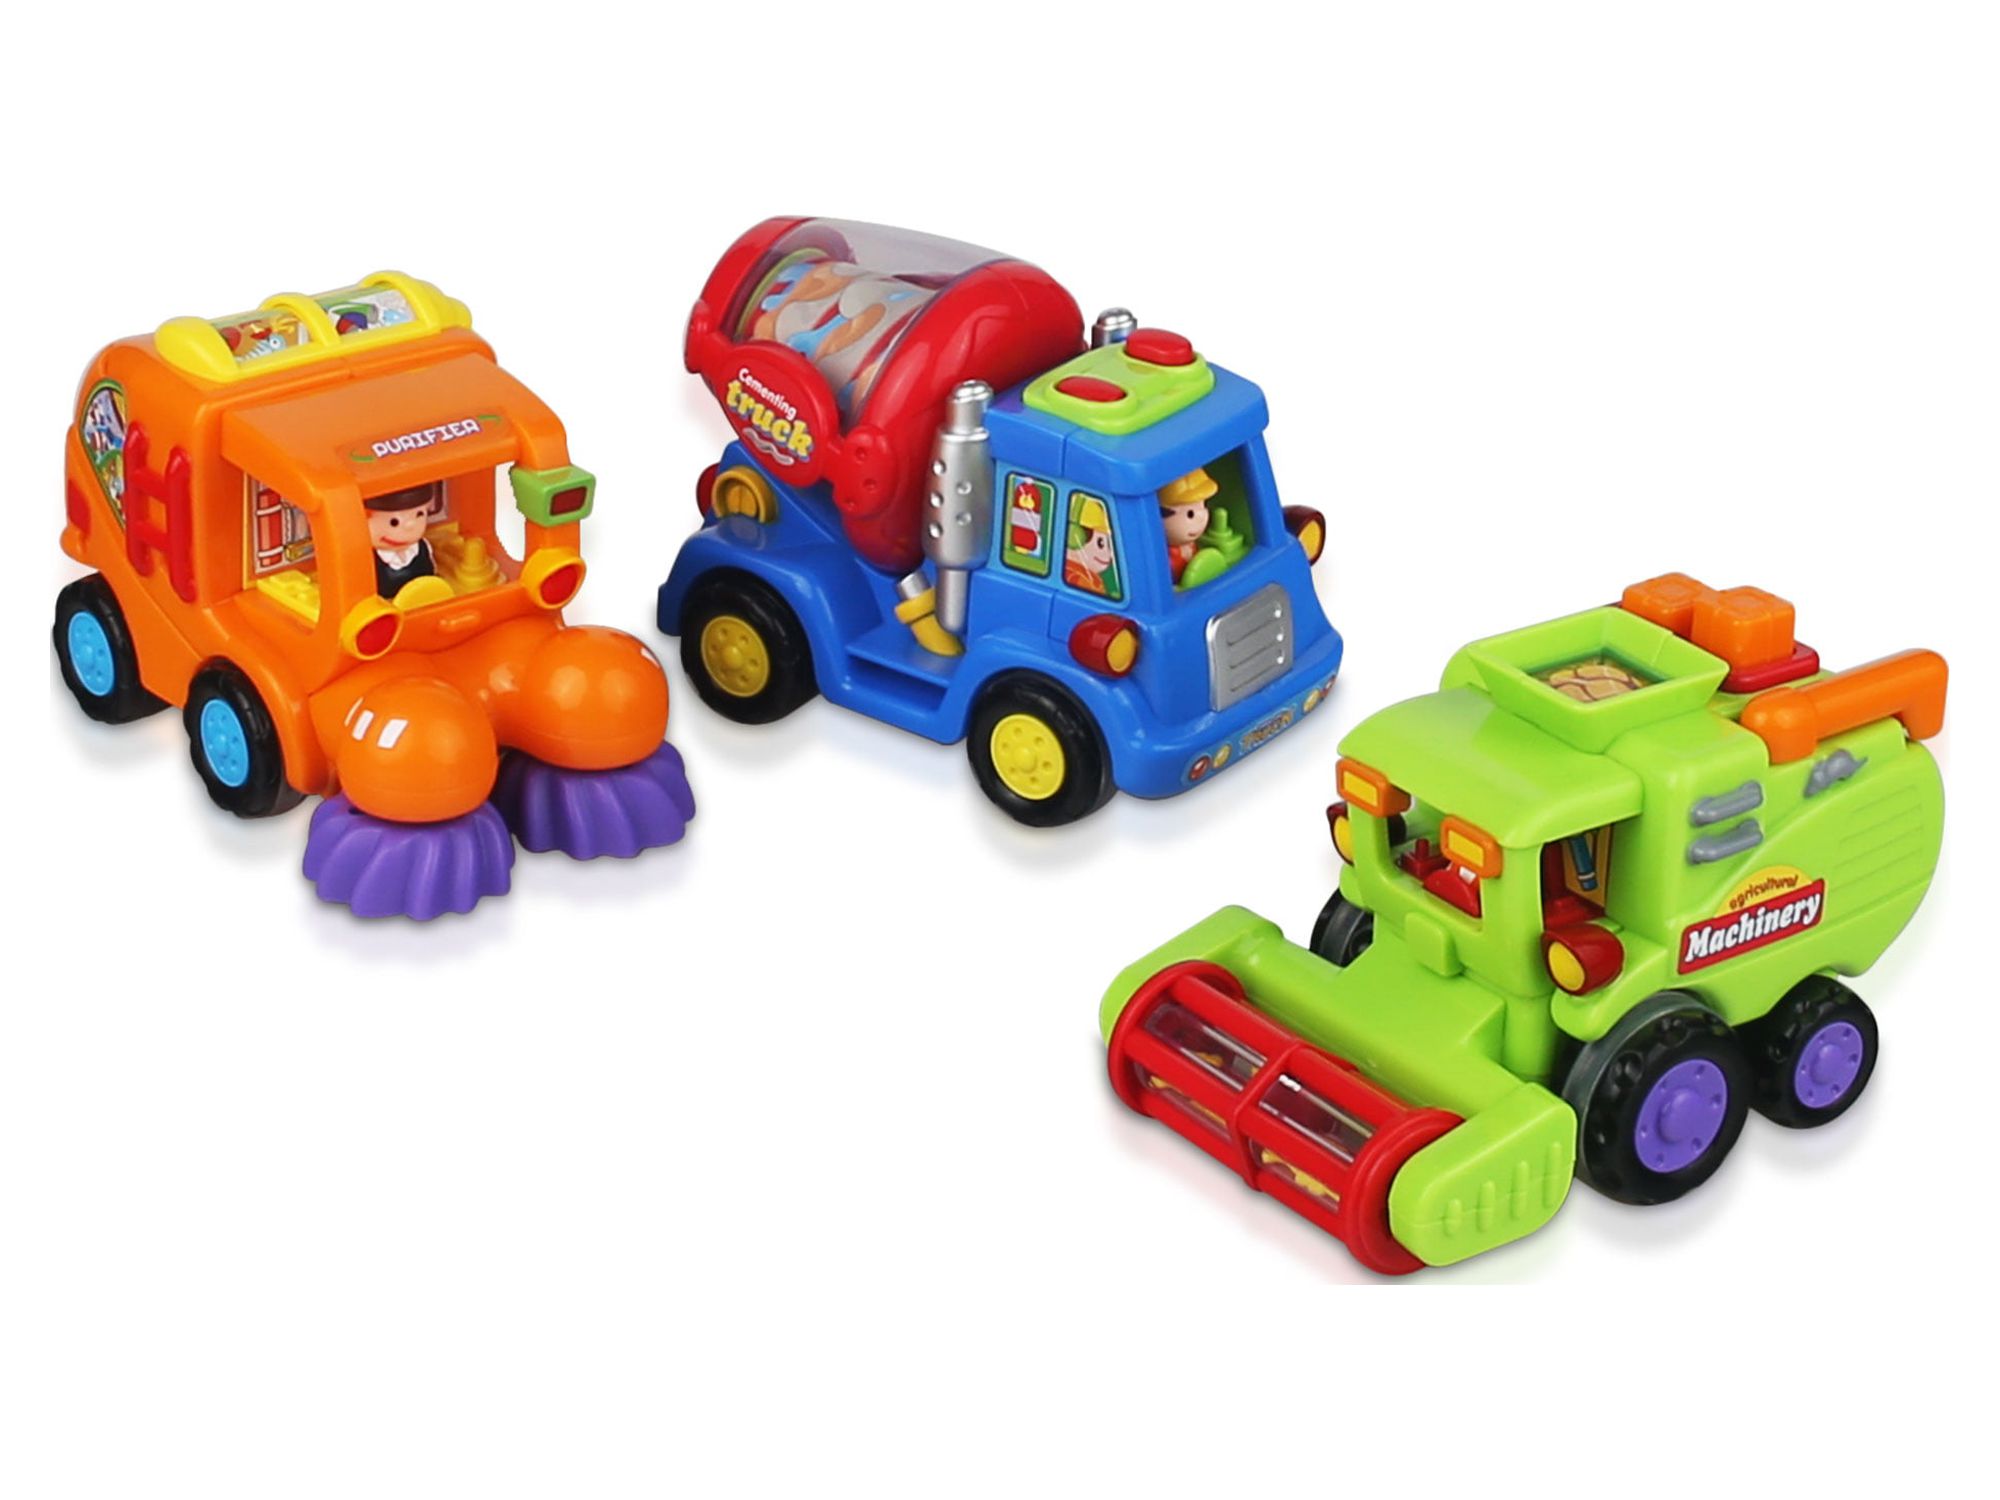 CifToys Friction Powered Push and Go Toddler Construction Toys Truck Vehicle Playset, Toys for 1 2 3 Year Old Boy Toys Gifts (3 Pieces) - image 2 of 10